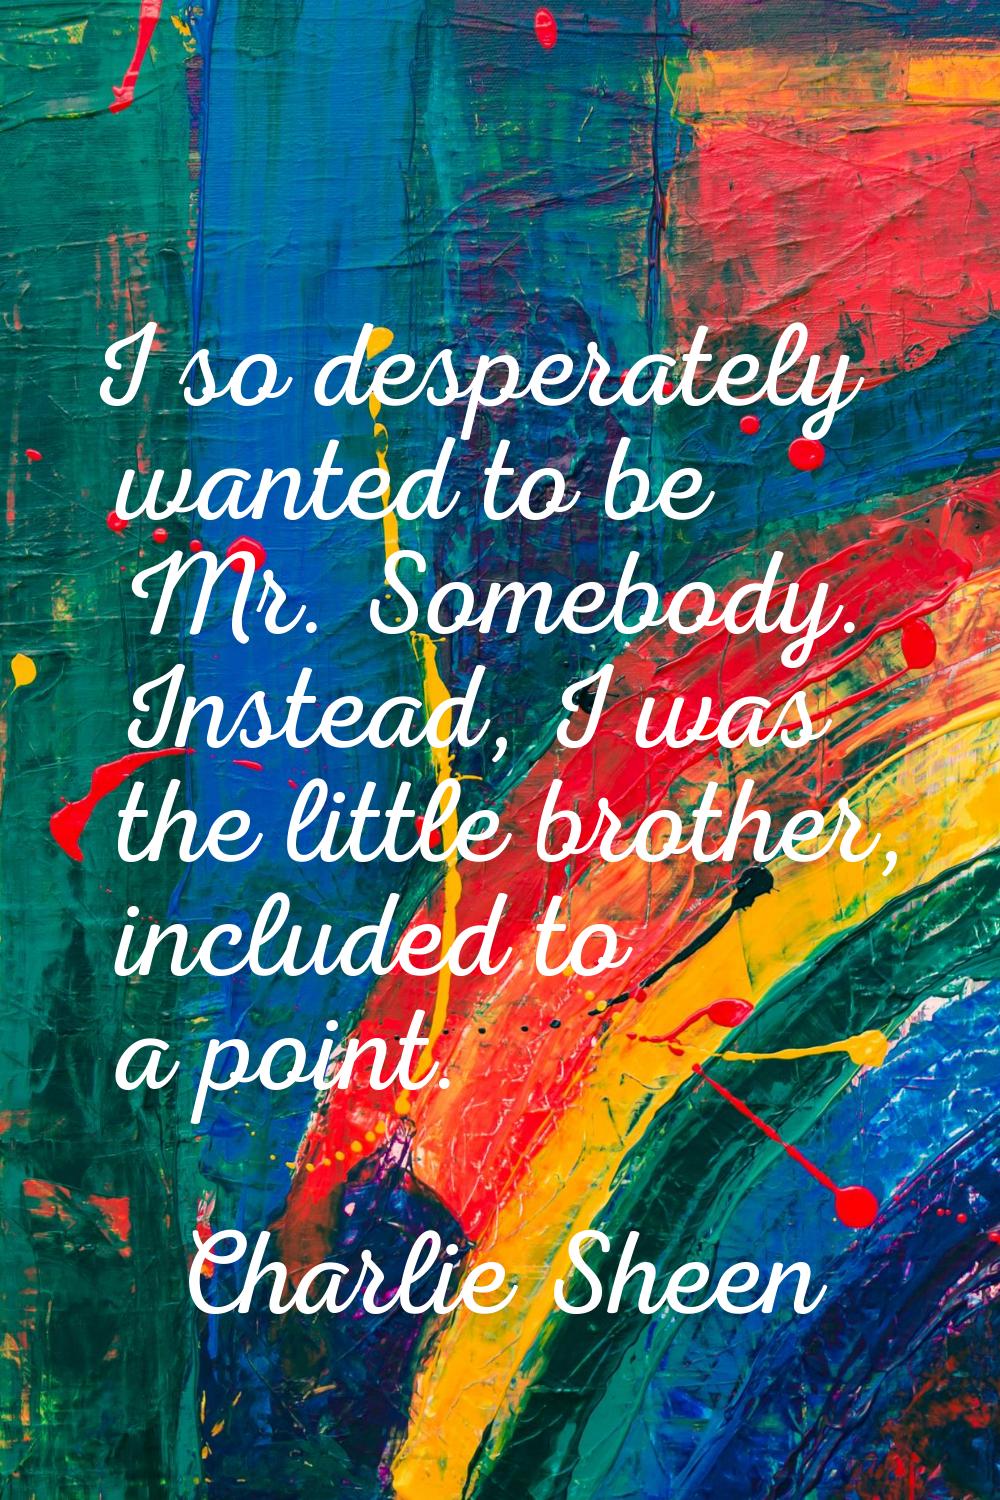 I so desperately wanted to be Mr. Somebody. Instead, I was the little brother, included to a point.